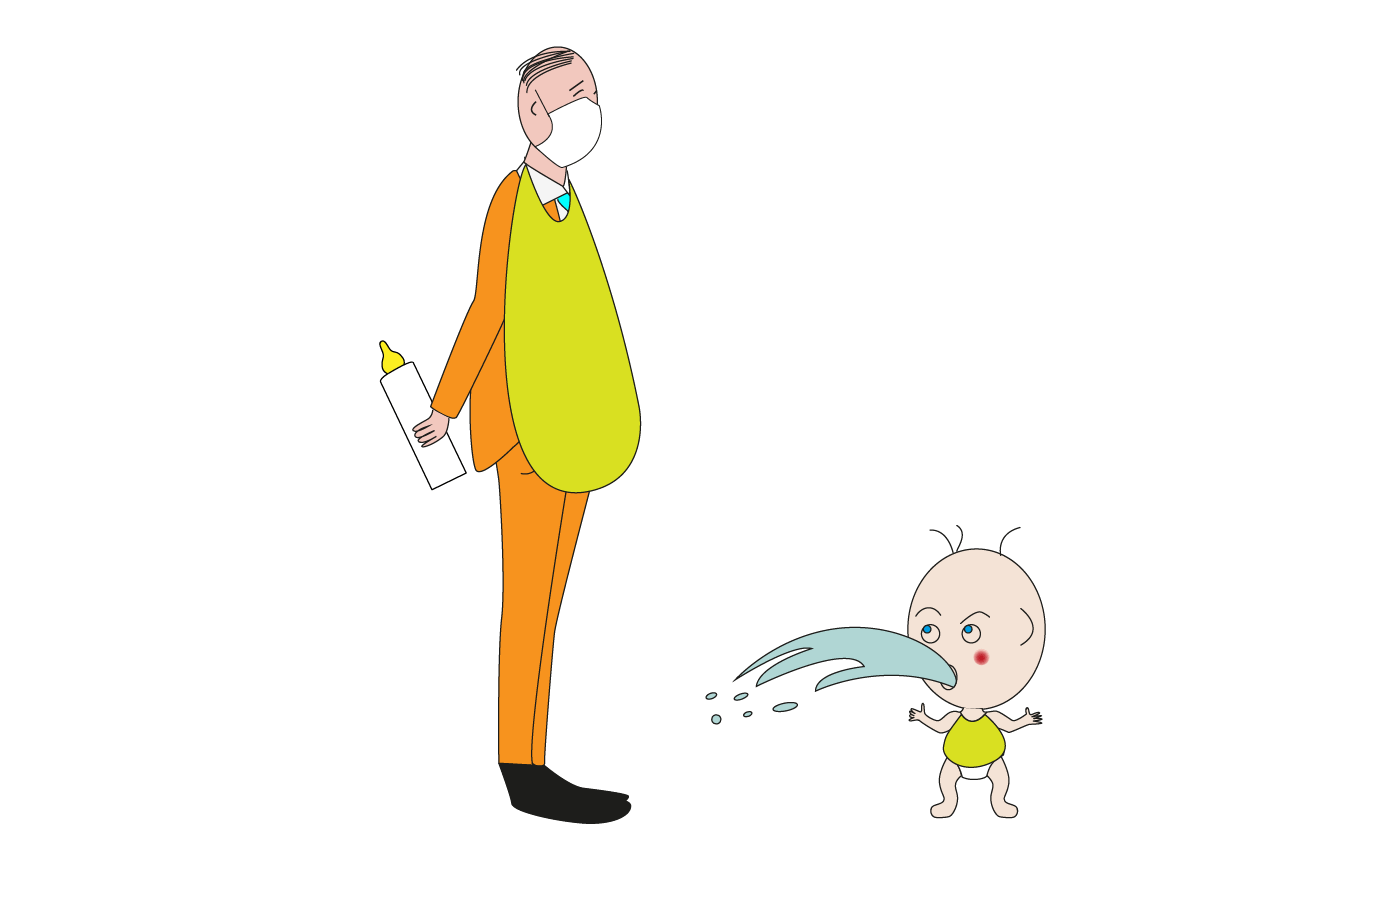 He pukes up once a day. Present simple illustrated.